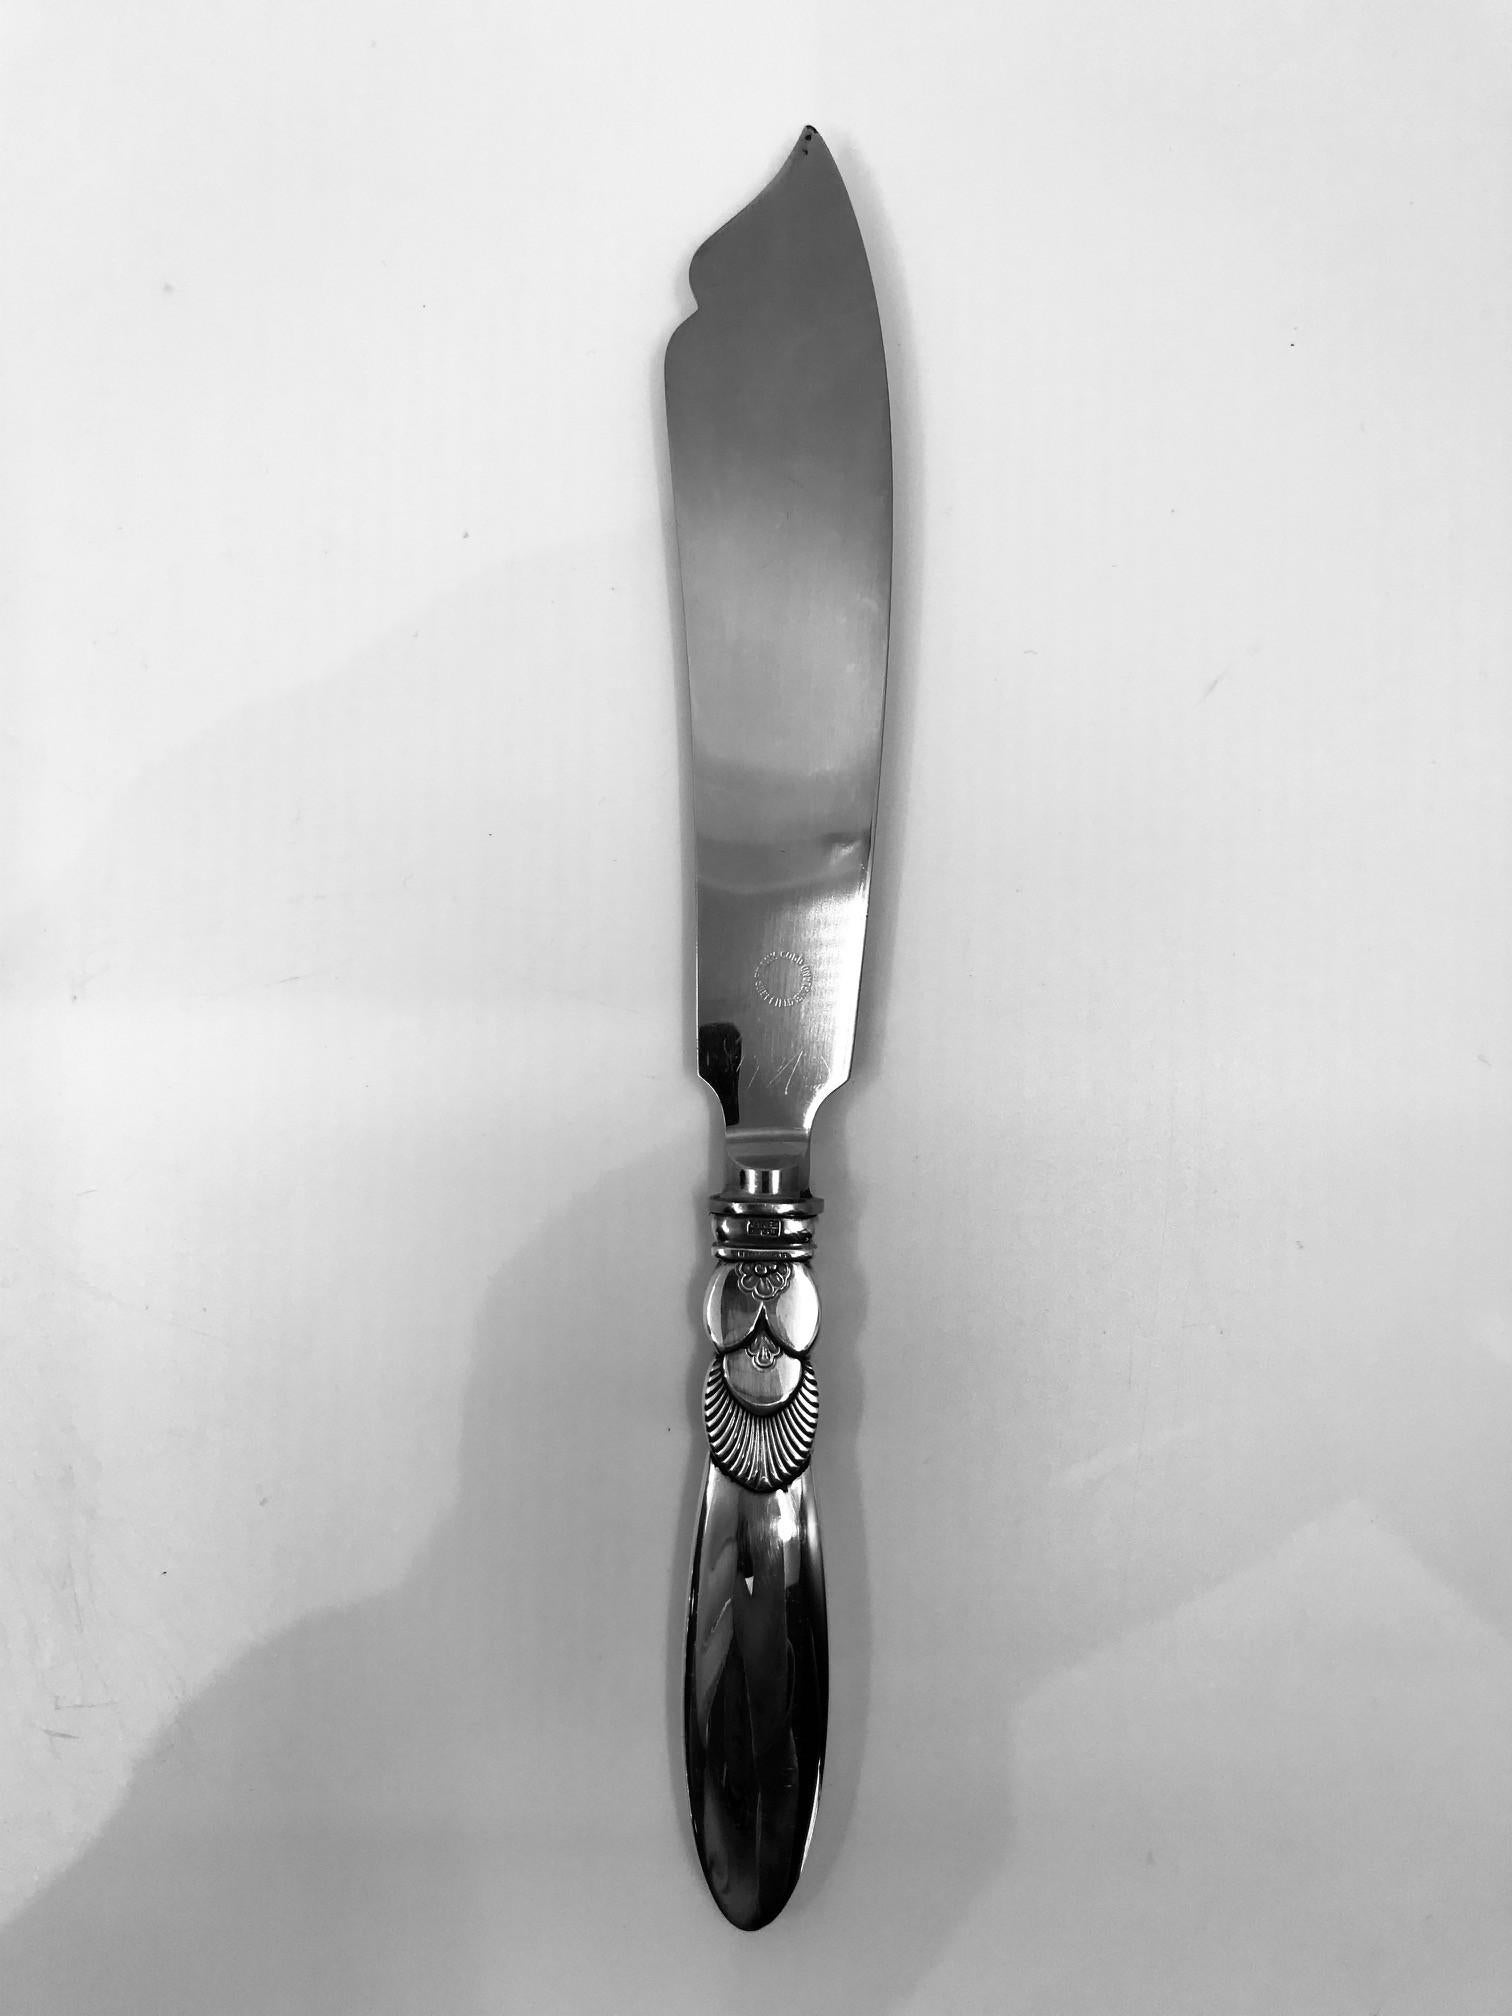 A sterling silver Georg Jensen cake knife with stainless steel blade, item 196 in the Cactus pattern, design #30 by Gundorph Albertus from 1930. Sometime after World War II Georg Jensen changed the shape of blade fitted to this knife, this is the